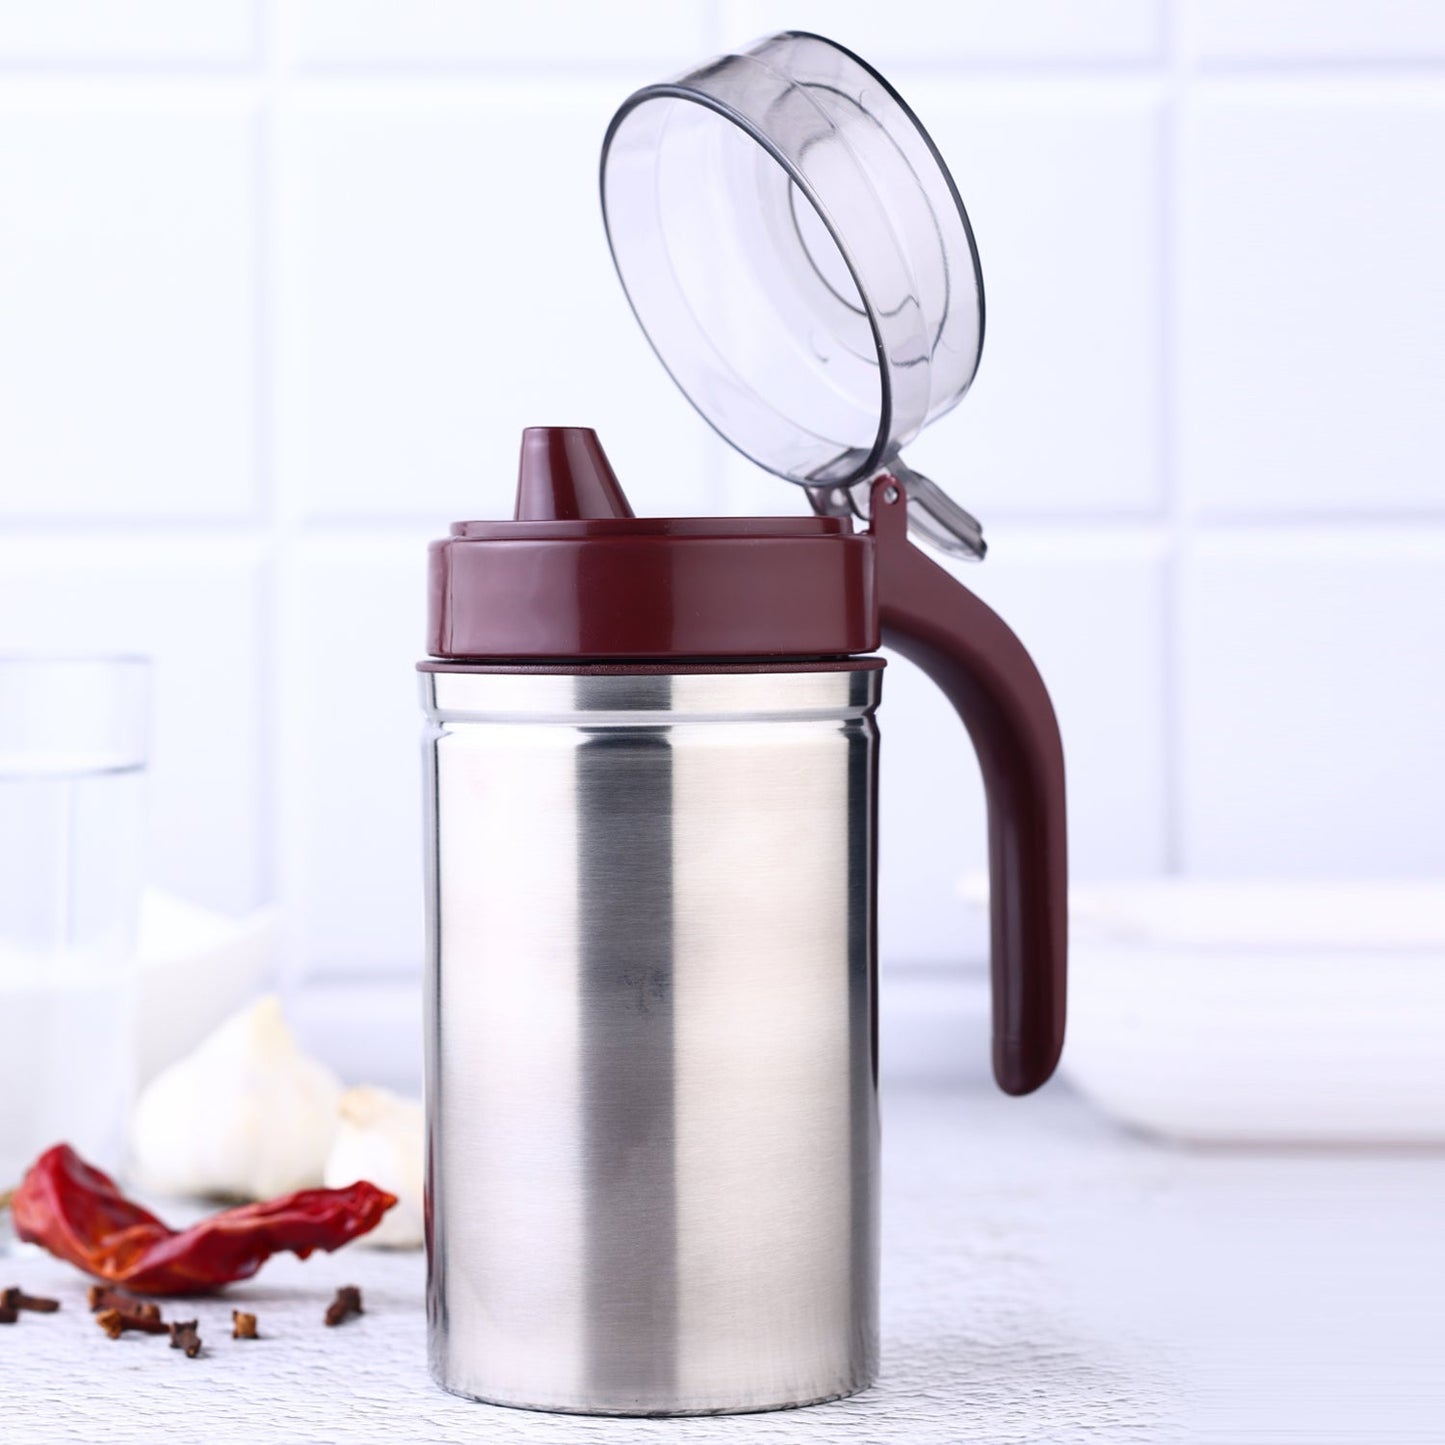 Oil Dispenser Stainless Steel with small nozzle 500ML Oil Container.